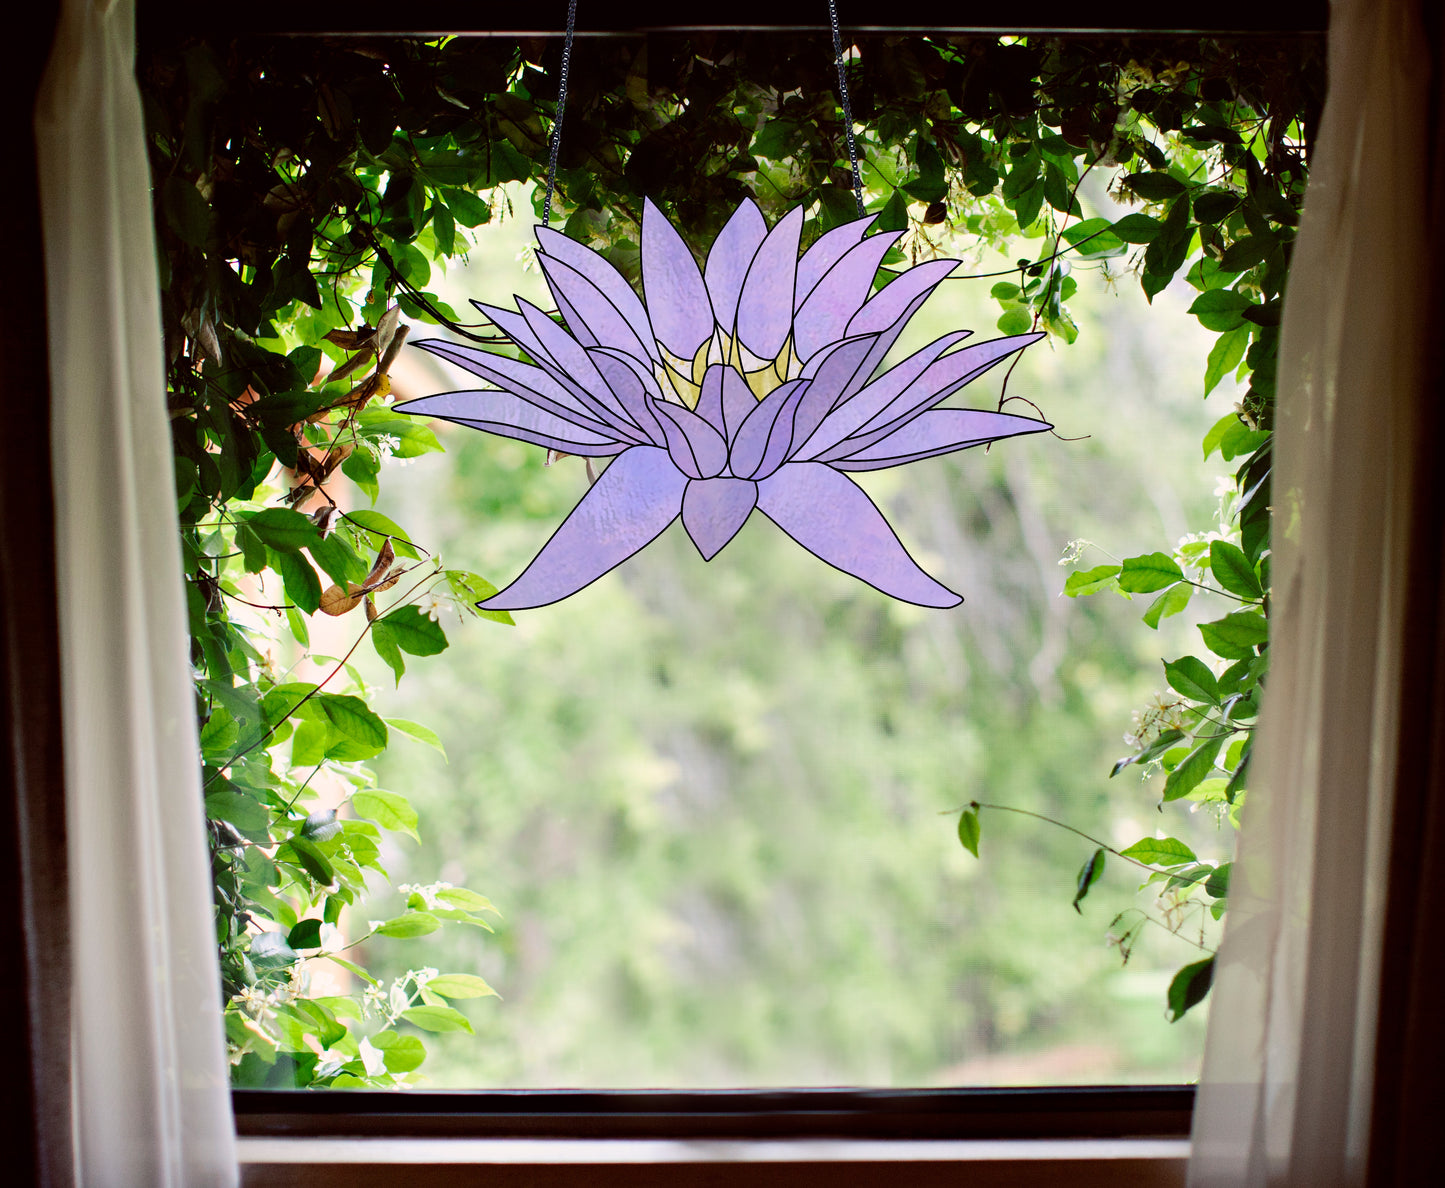 Stained glass pattern for a giant purple water lily flower, instant PDF download, shown hanging in a window with ivy